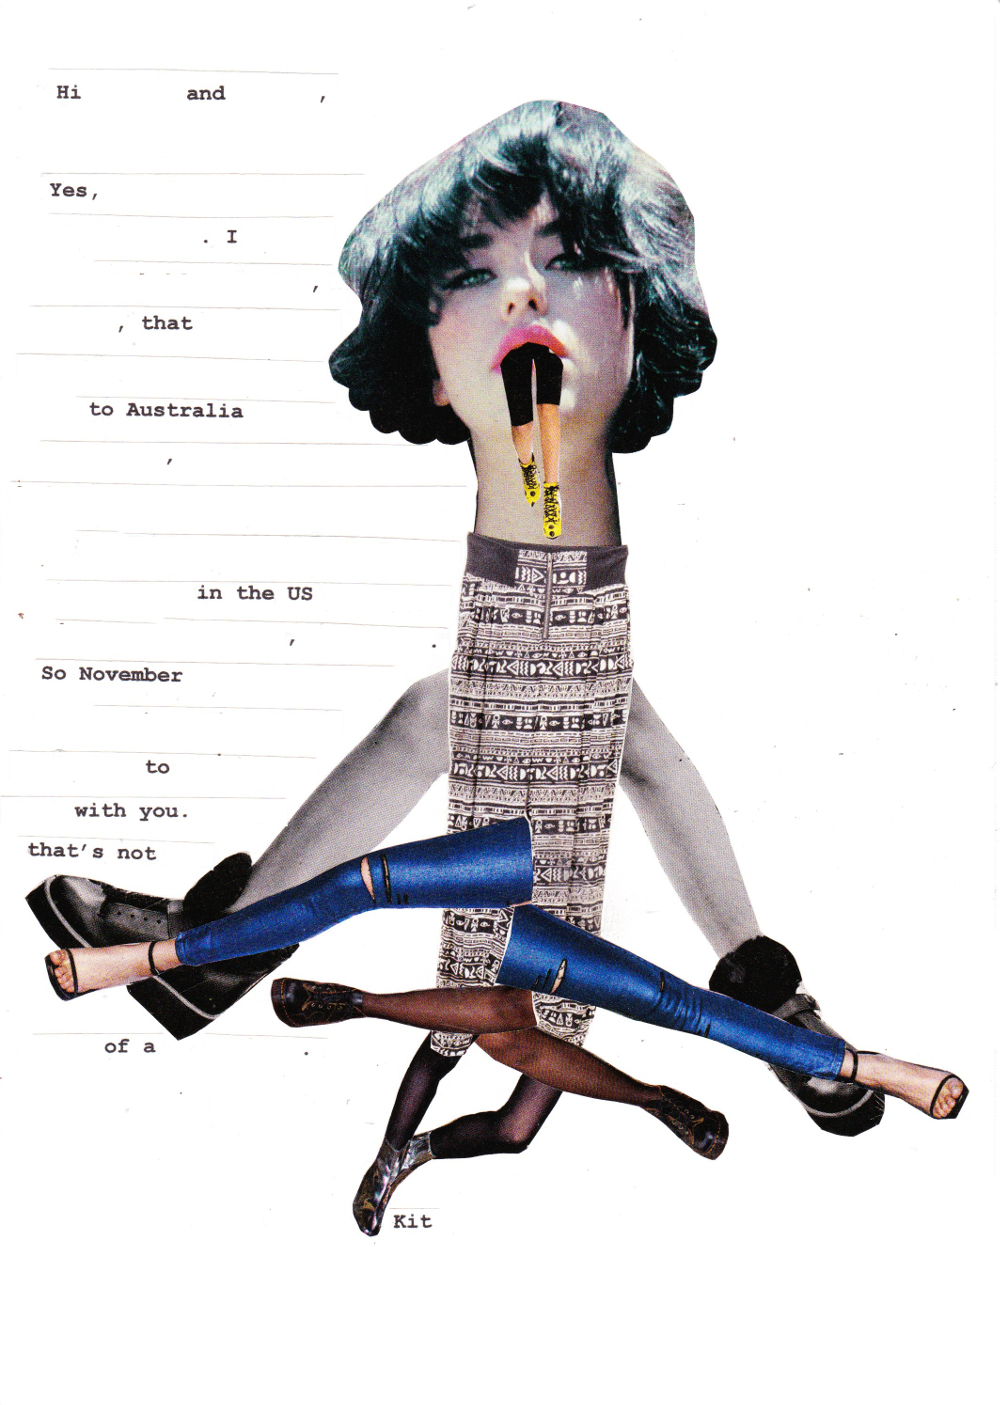 collage depicting a woman with 8 legs who is also eating a pair of legs, next to redacted strips of text